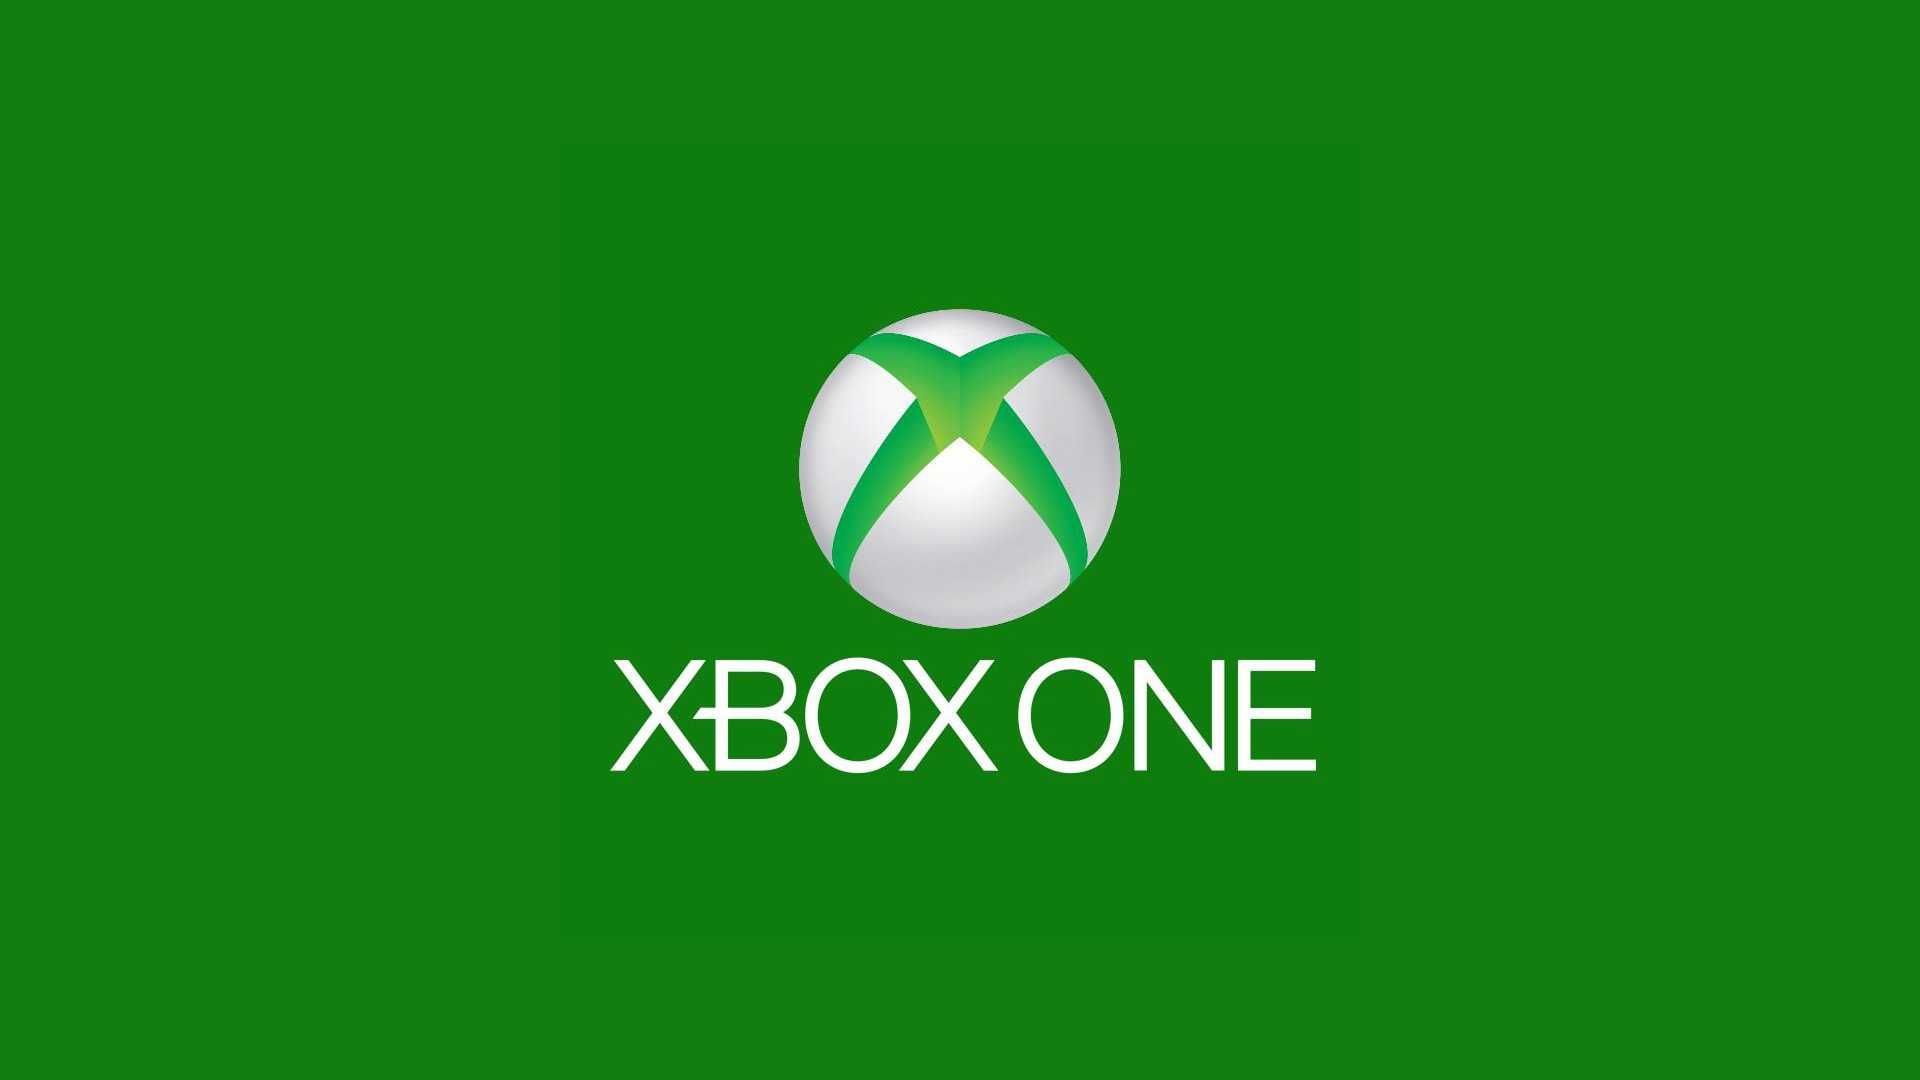 Xbox one wallpapers high quality